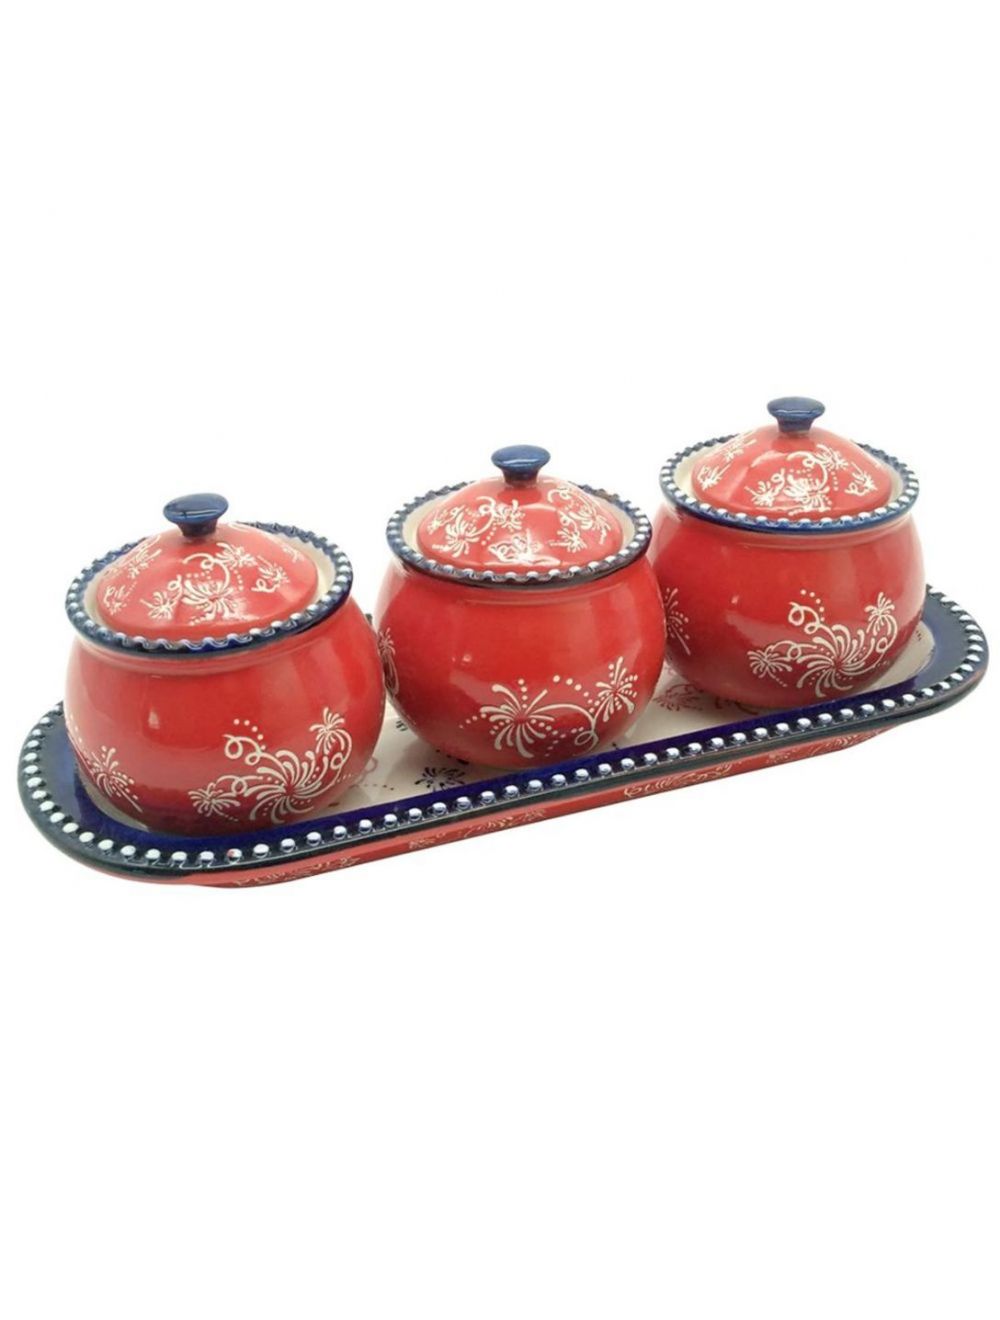 Temp-tations Floral Lace Mini Ramekins with Lid and Tray - 4 Piece-T49015-firework